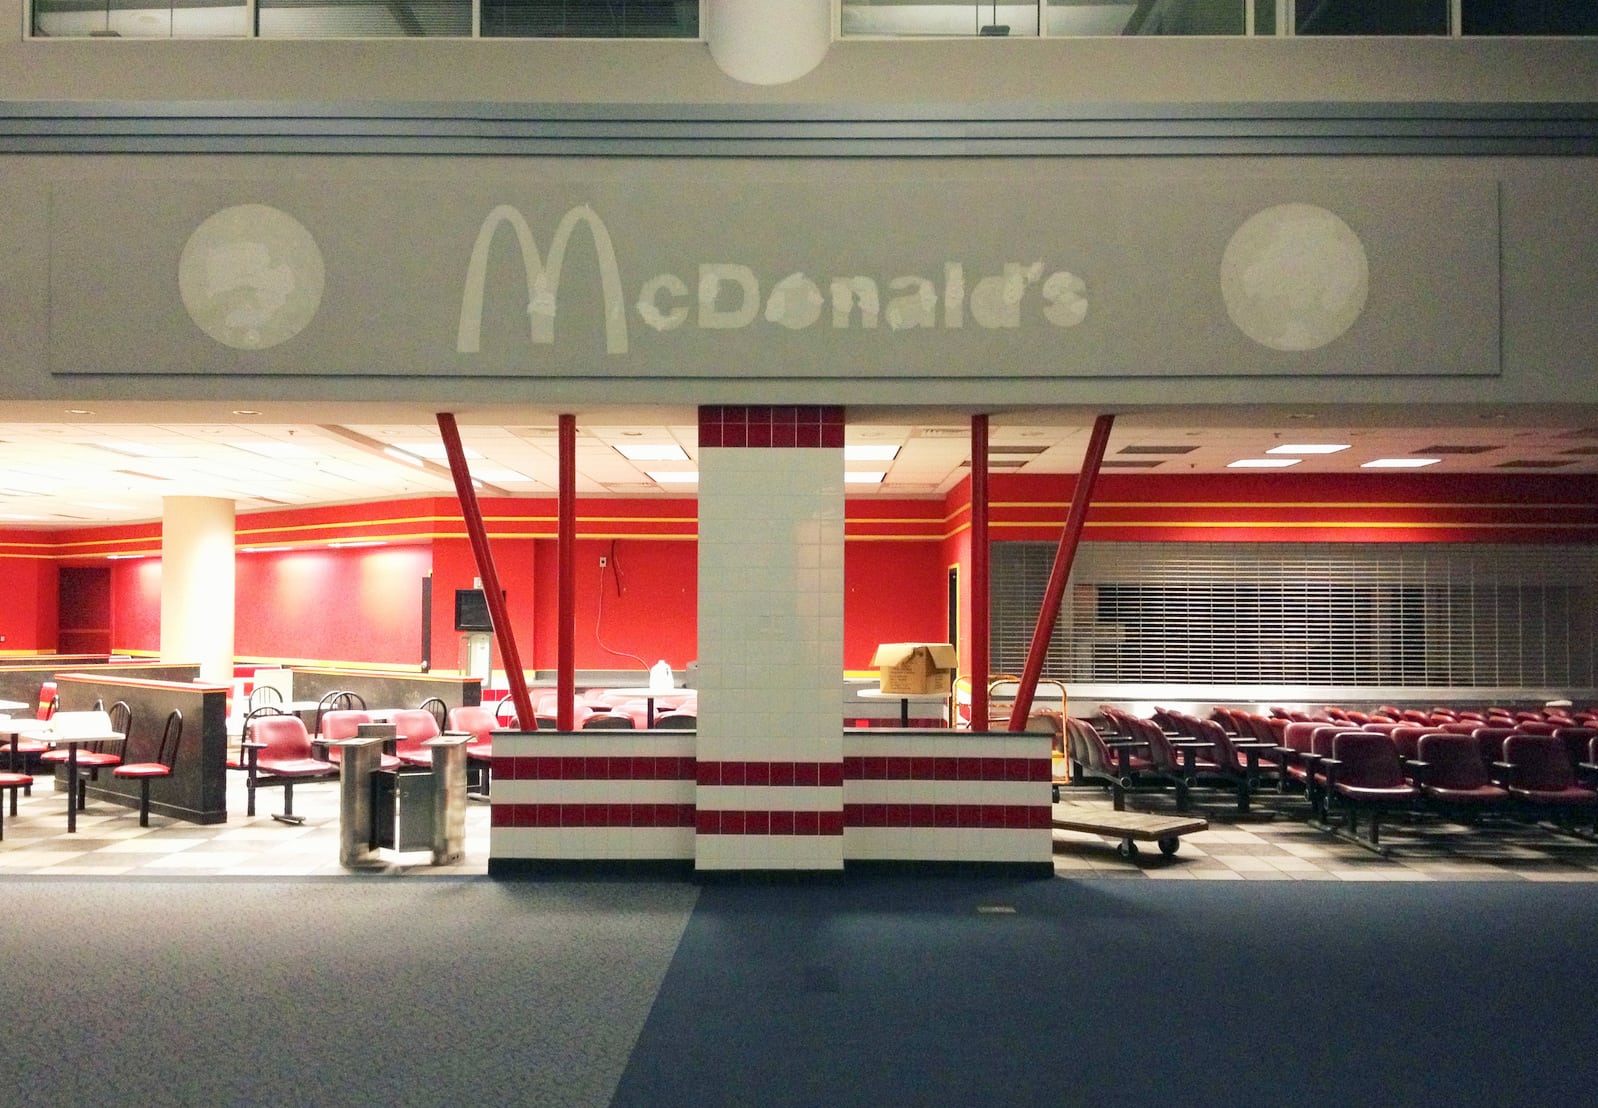 This closed McDonald's is one of the many abandoned restaurants and shops in the now-closed Concourse C at Greater Cincinnati International Airport.